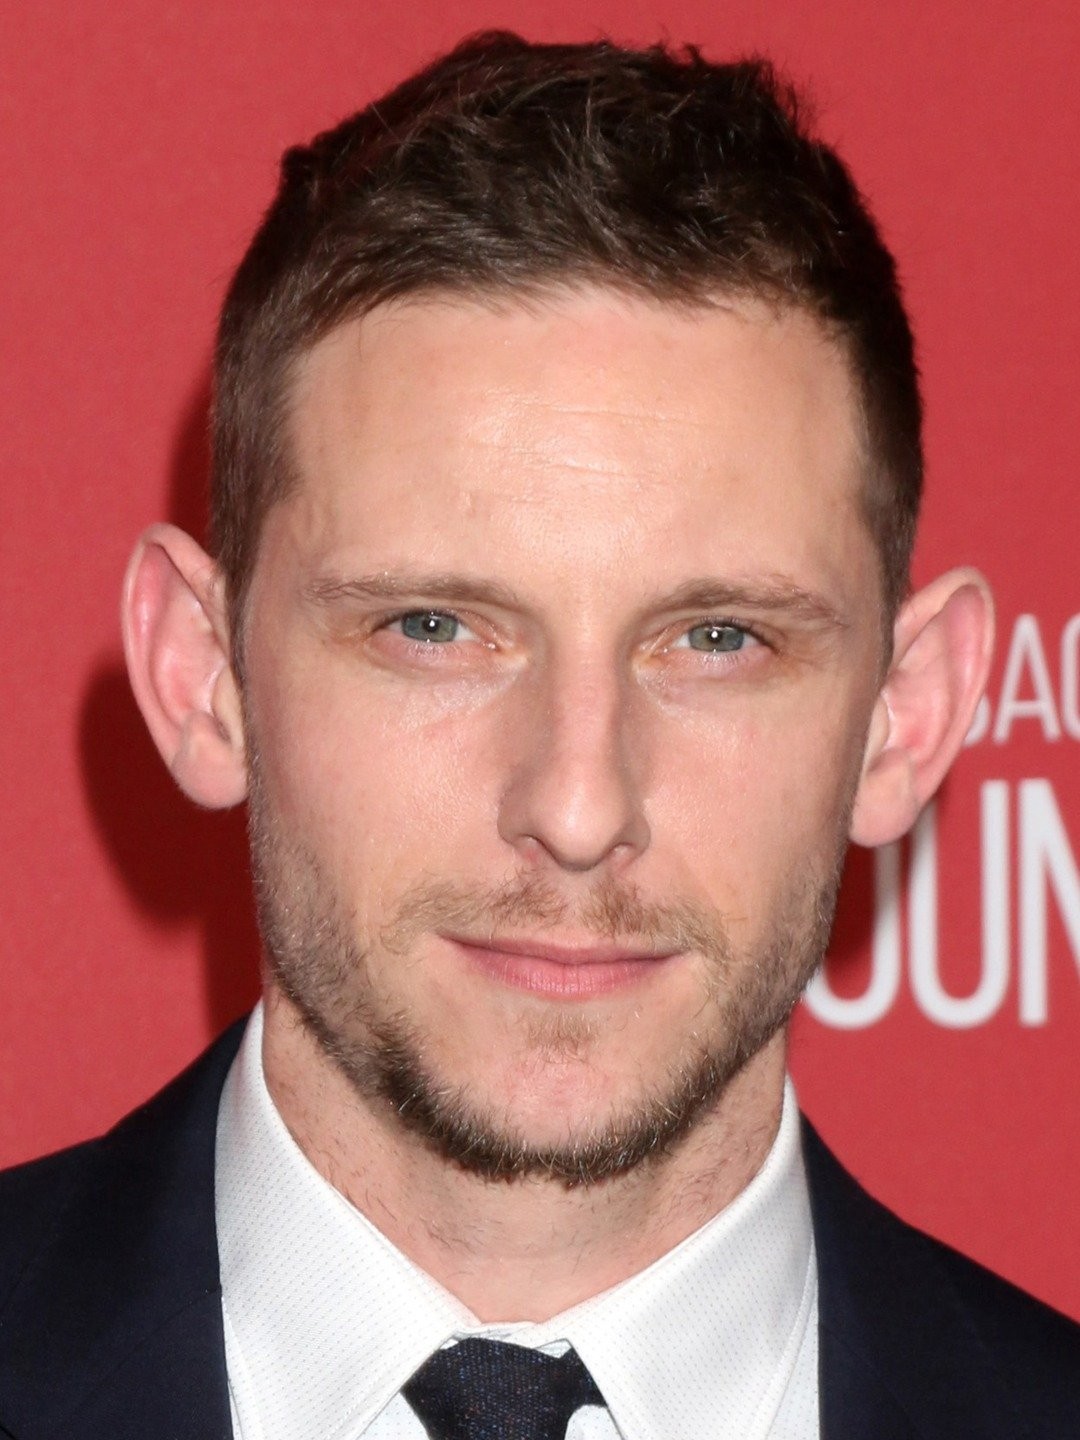 Jumper' TV Series in the Works With Star Jamie Bell